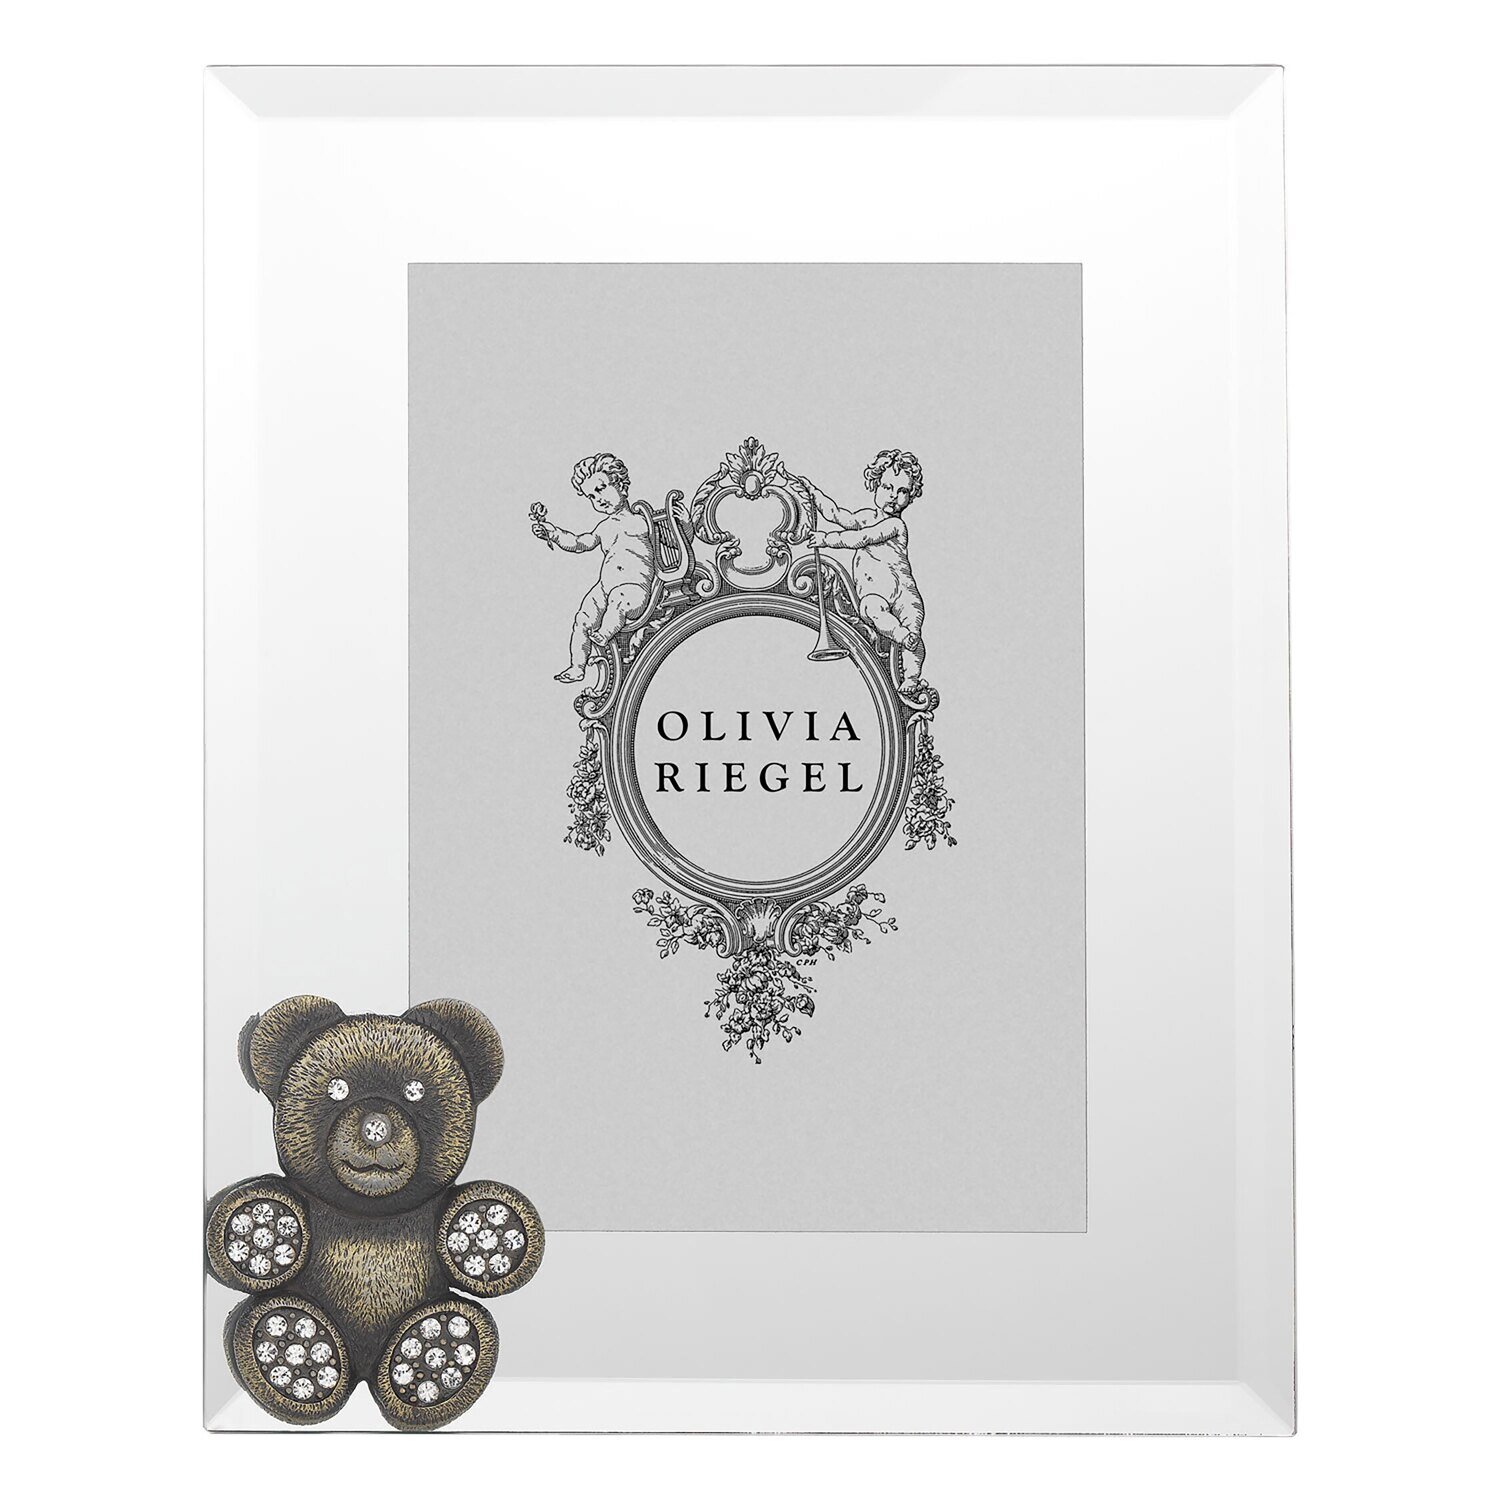 Olivia Riegel Bronze Teddy Bear 5 x 7 Inch Picture Frame RT4878